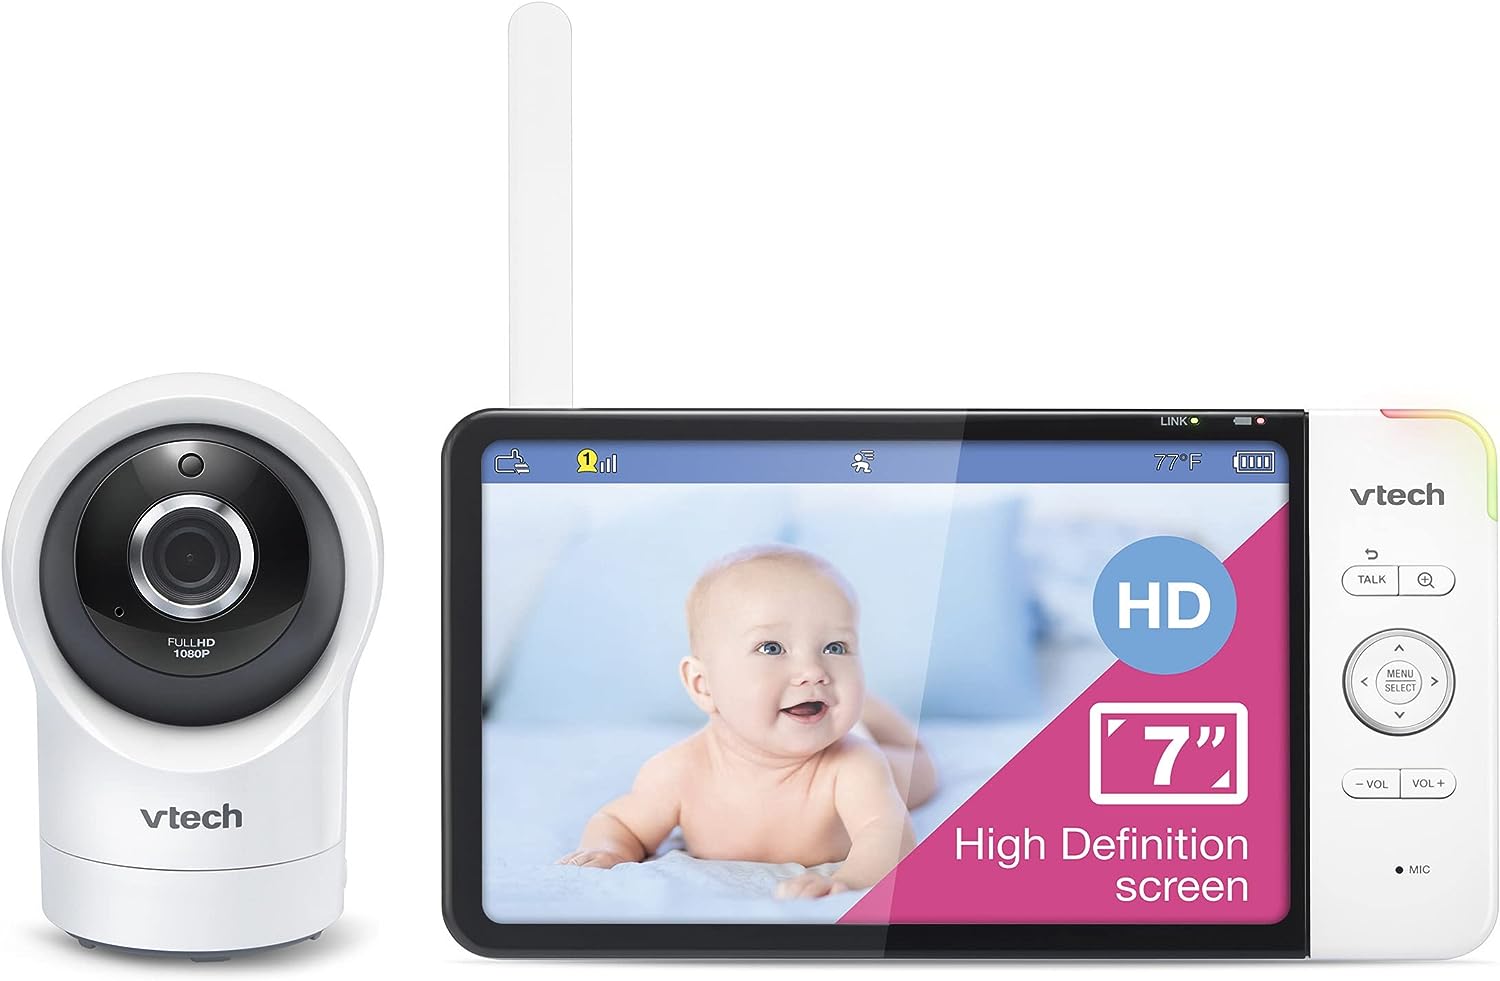 VTech RM7764HD 1080p WiFi Remote Access Baby Monitor Guide How to Set Up